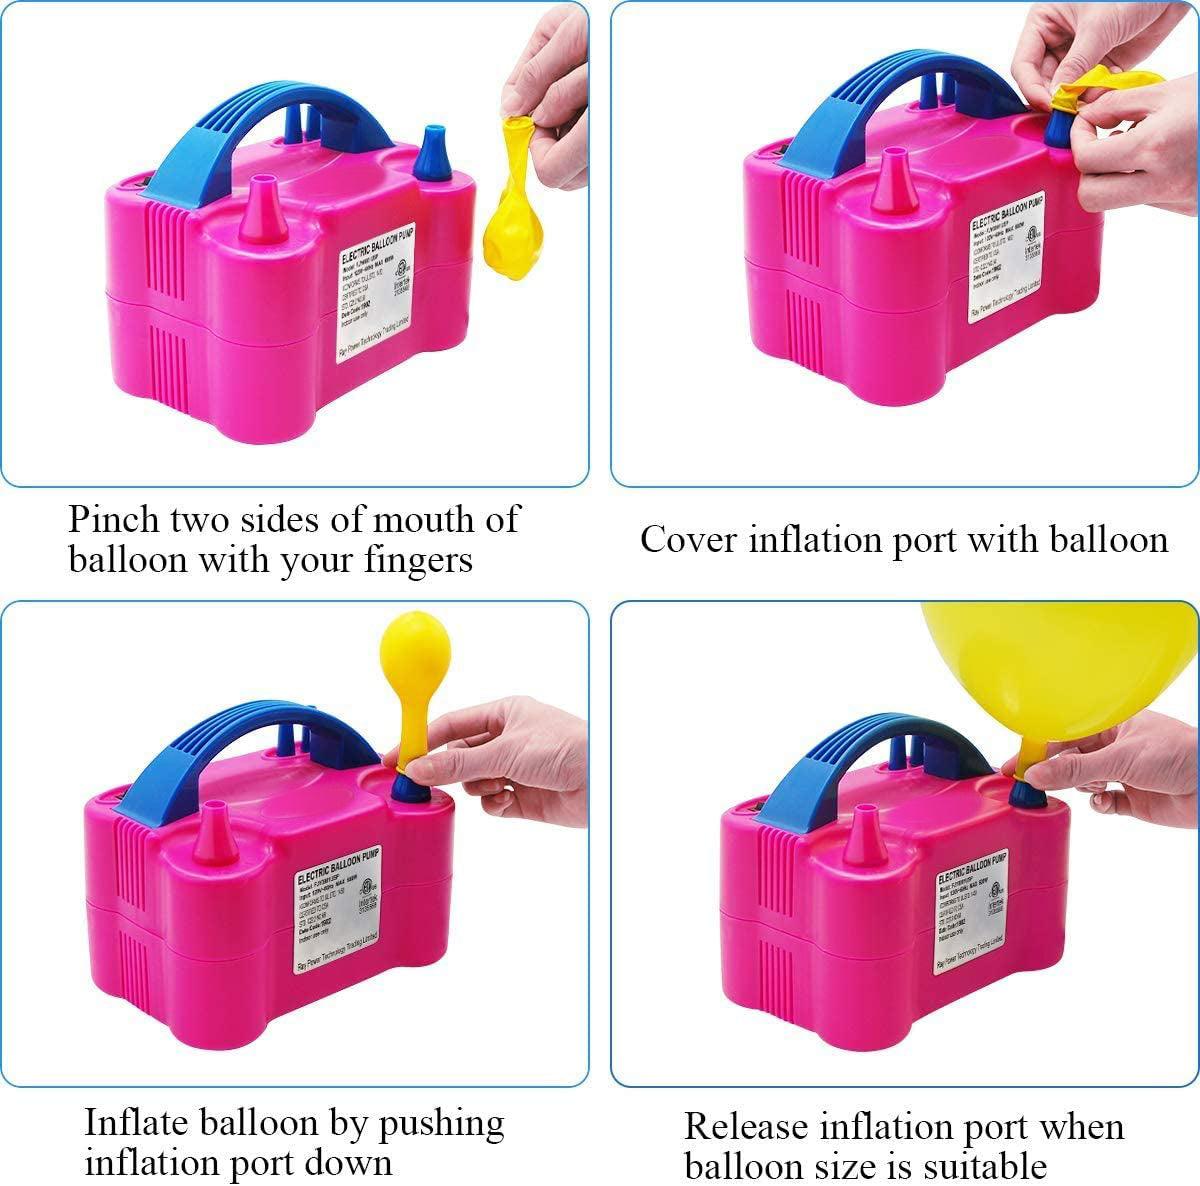 Electric Balloon Blower Pump / Electric Balloon Inflator For Decoration - If you say i do